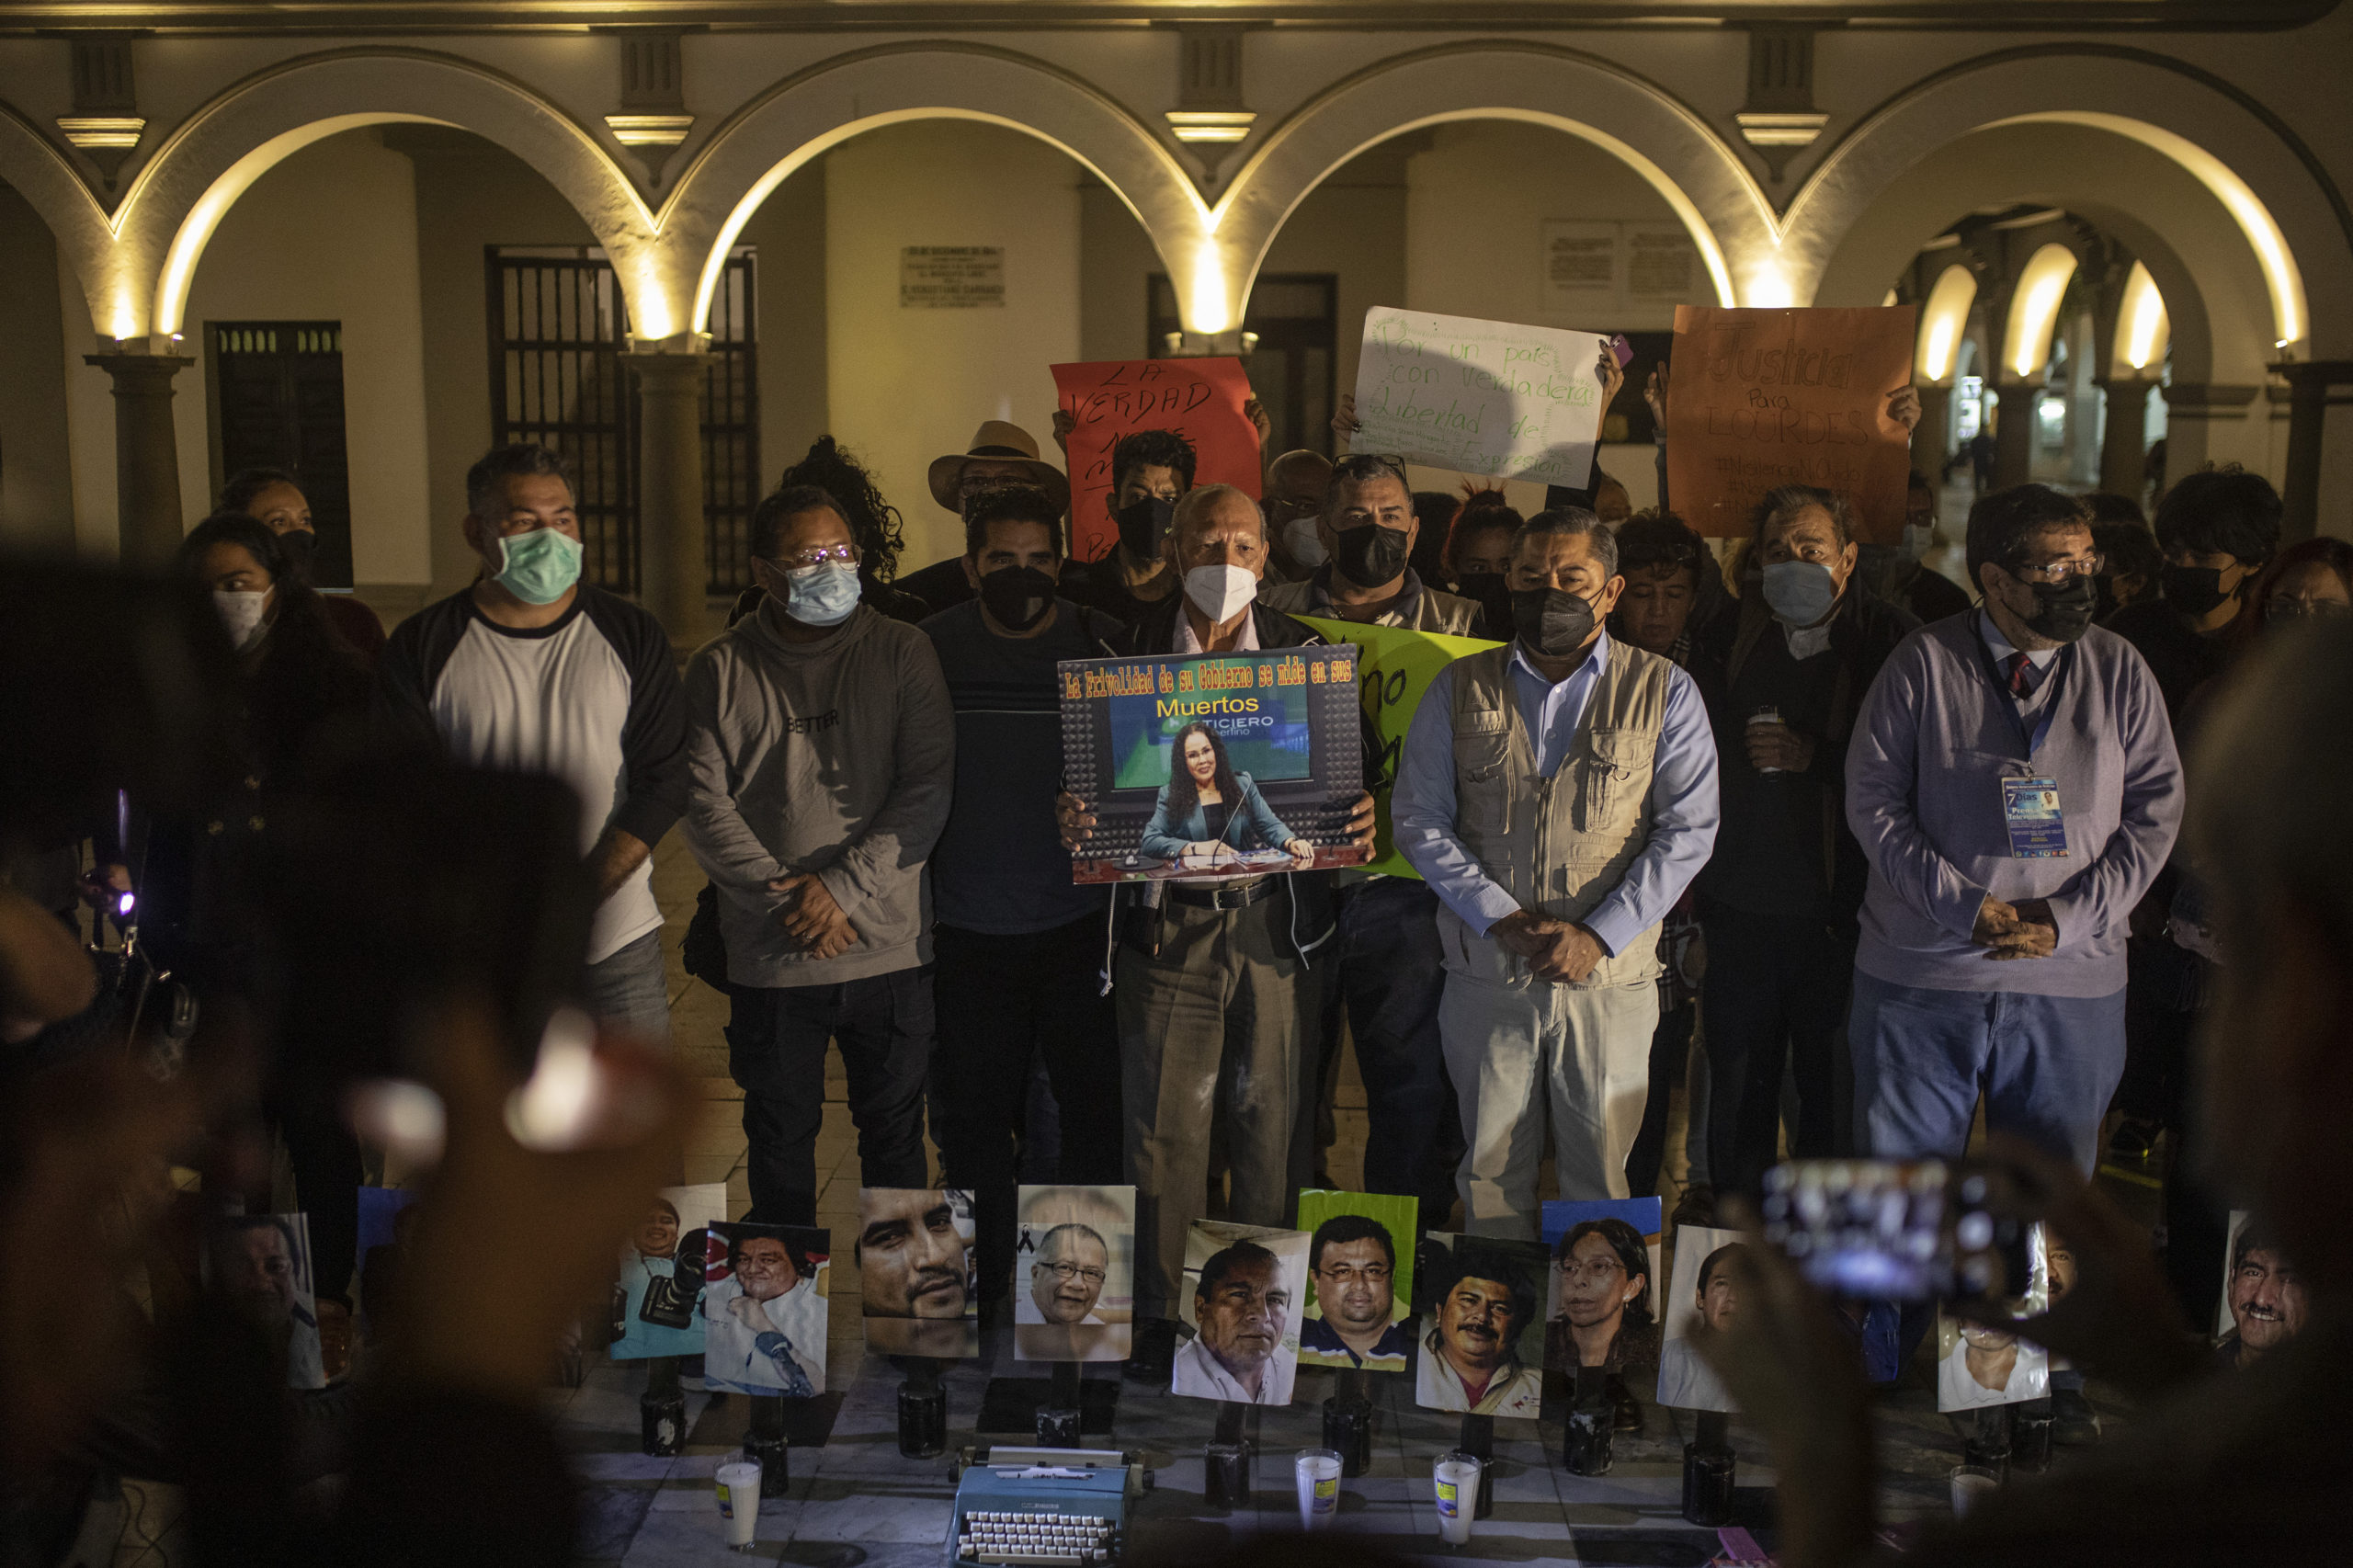 On the floor are over a dozen photos of journalists murdered, with candles surrounding them and a typewriter at the center. A line of people stand behind the photo vigil, some holding signs. The person in the center holds a sign that reads "La Frivolidad de su Gobierno se mide en sus Muertos"